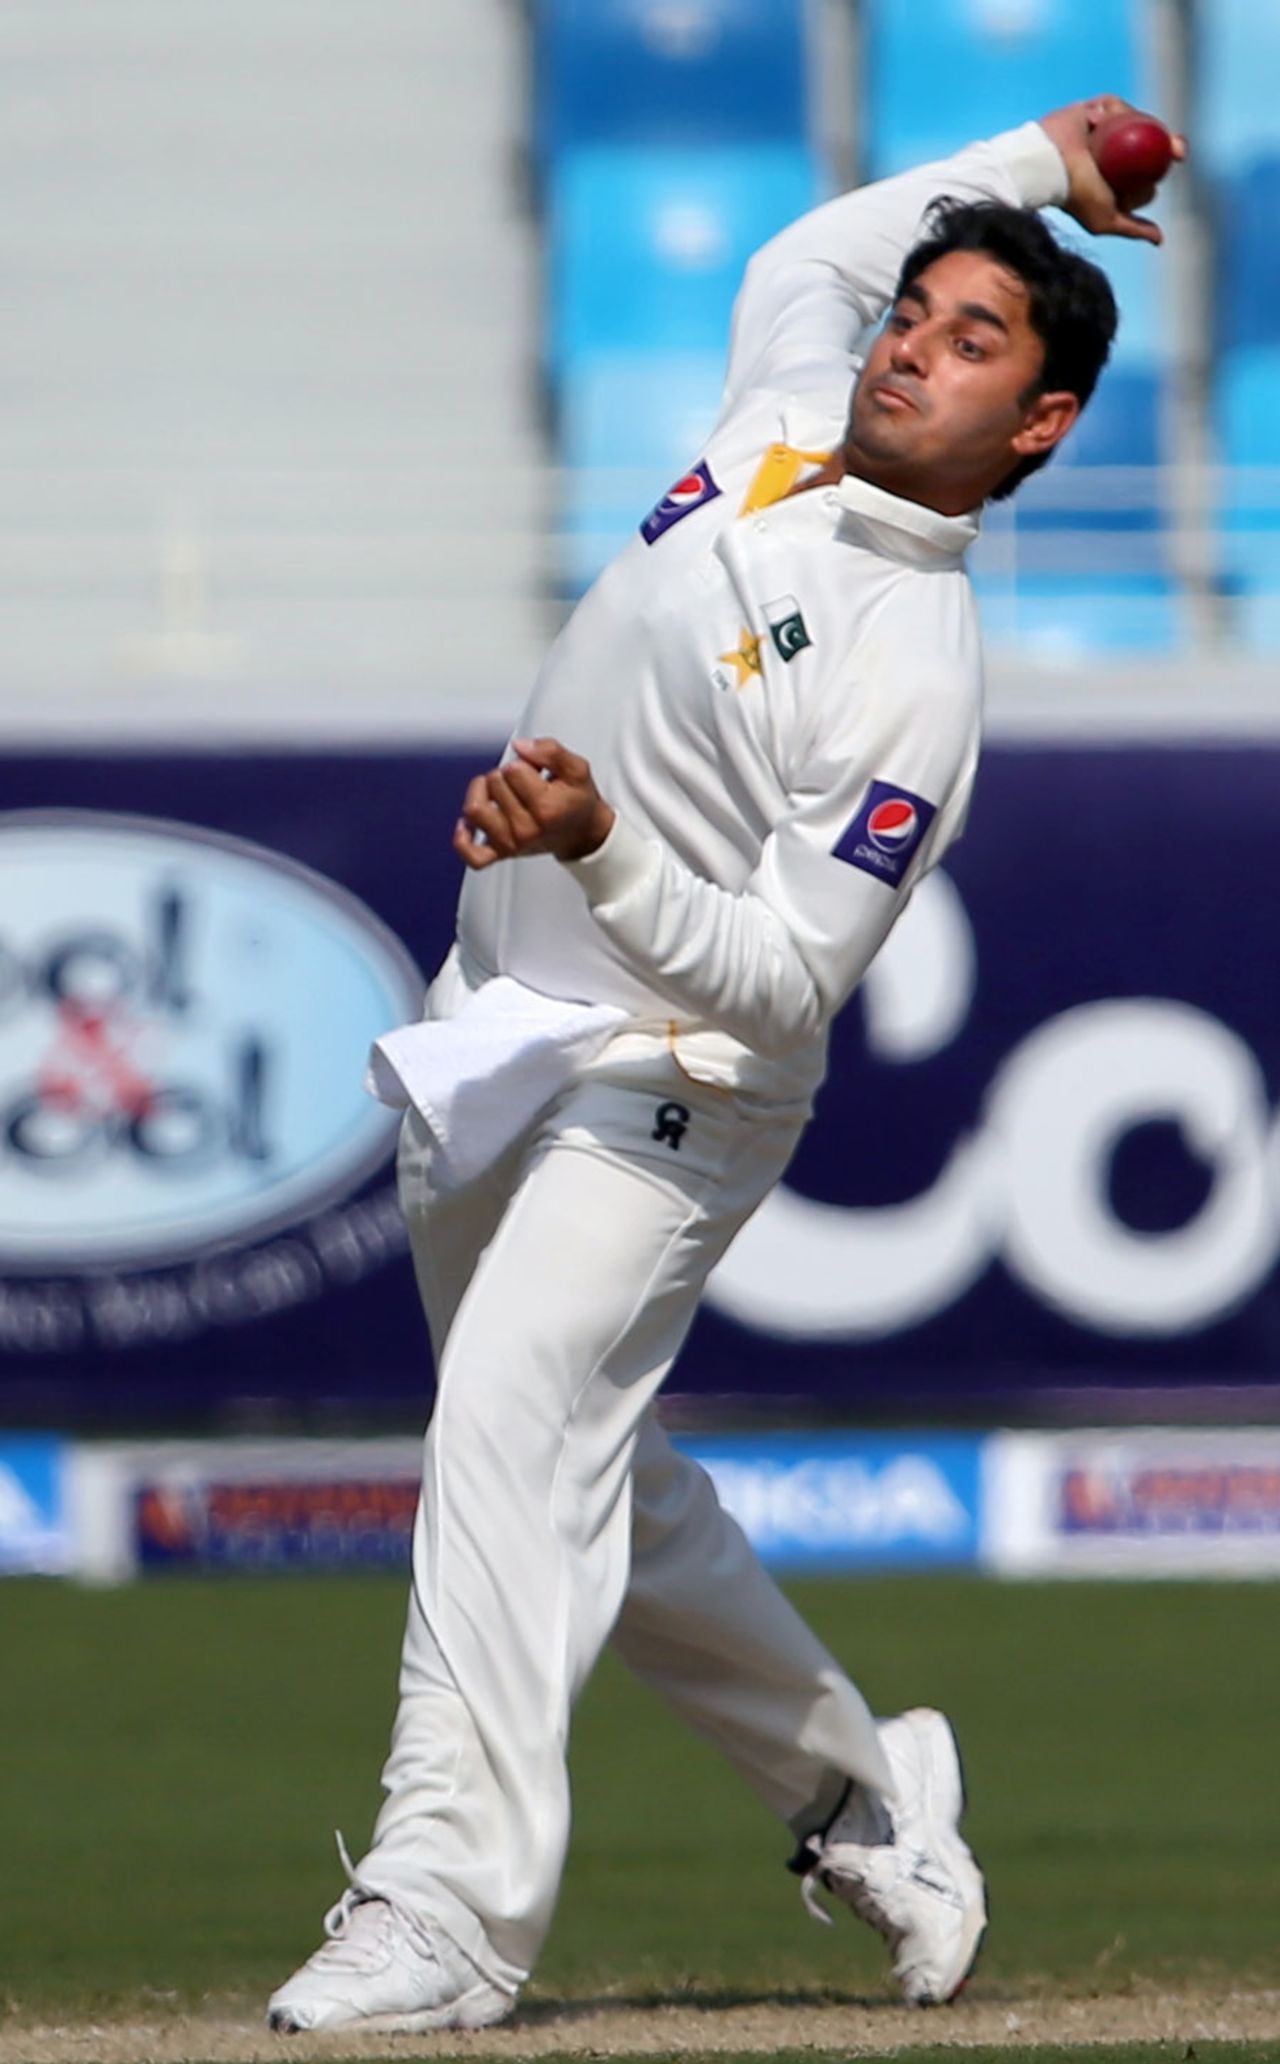 Saeed Ajmal in his delivery stride, Pakistan v South Africa, 2nd Test, Dubai, 3rd day, October 25, 2013